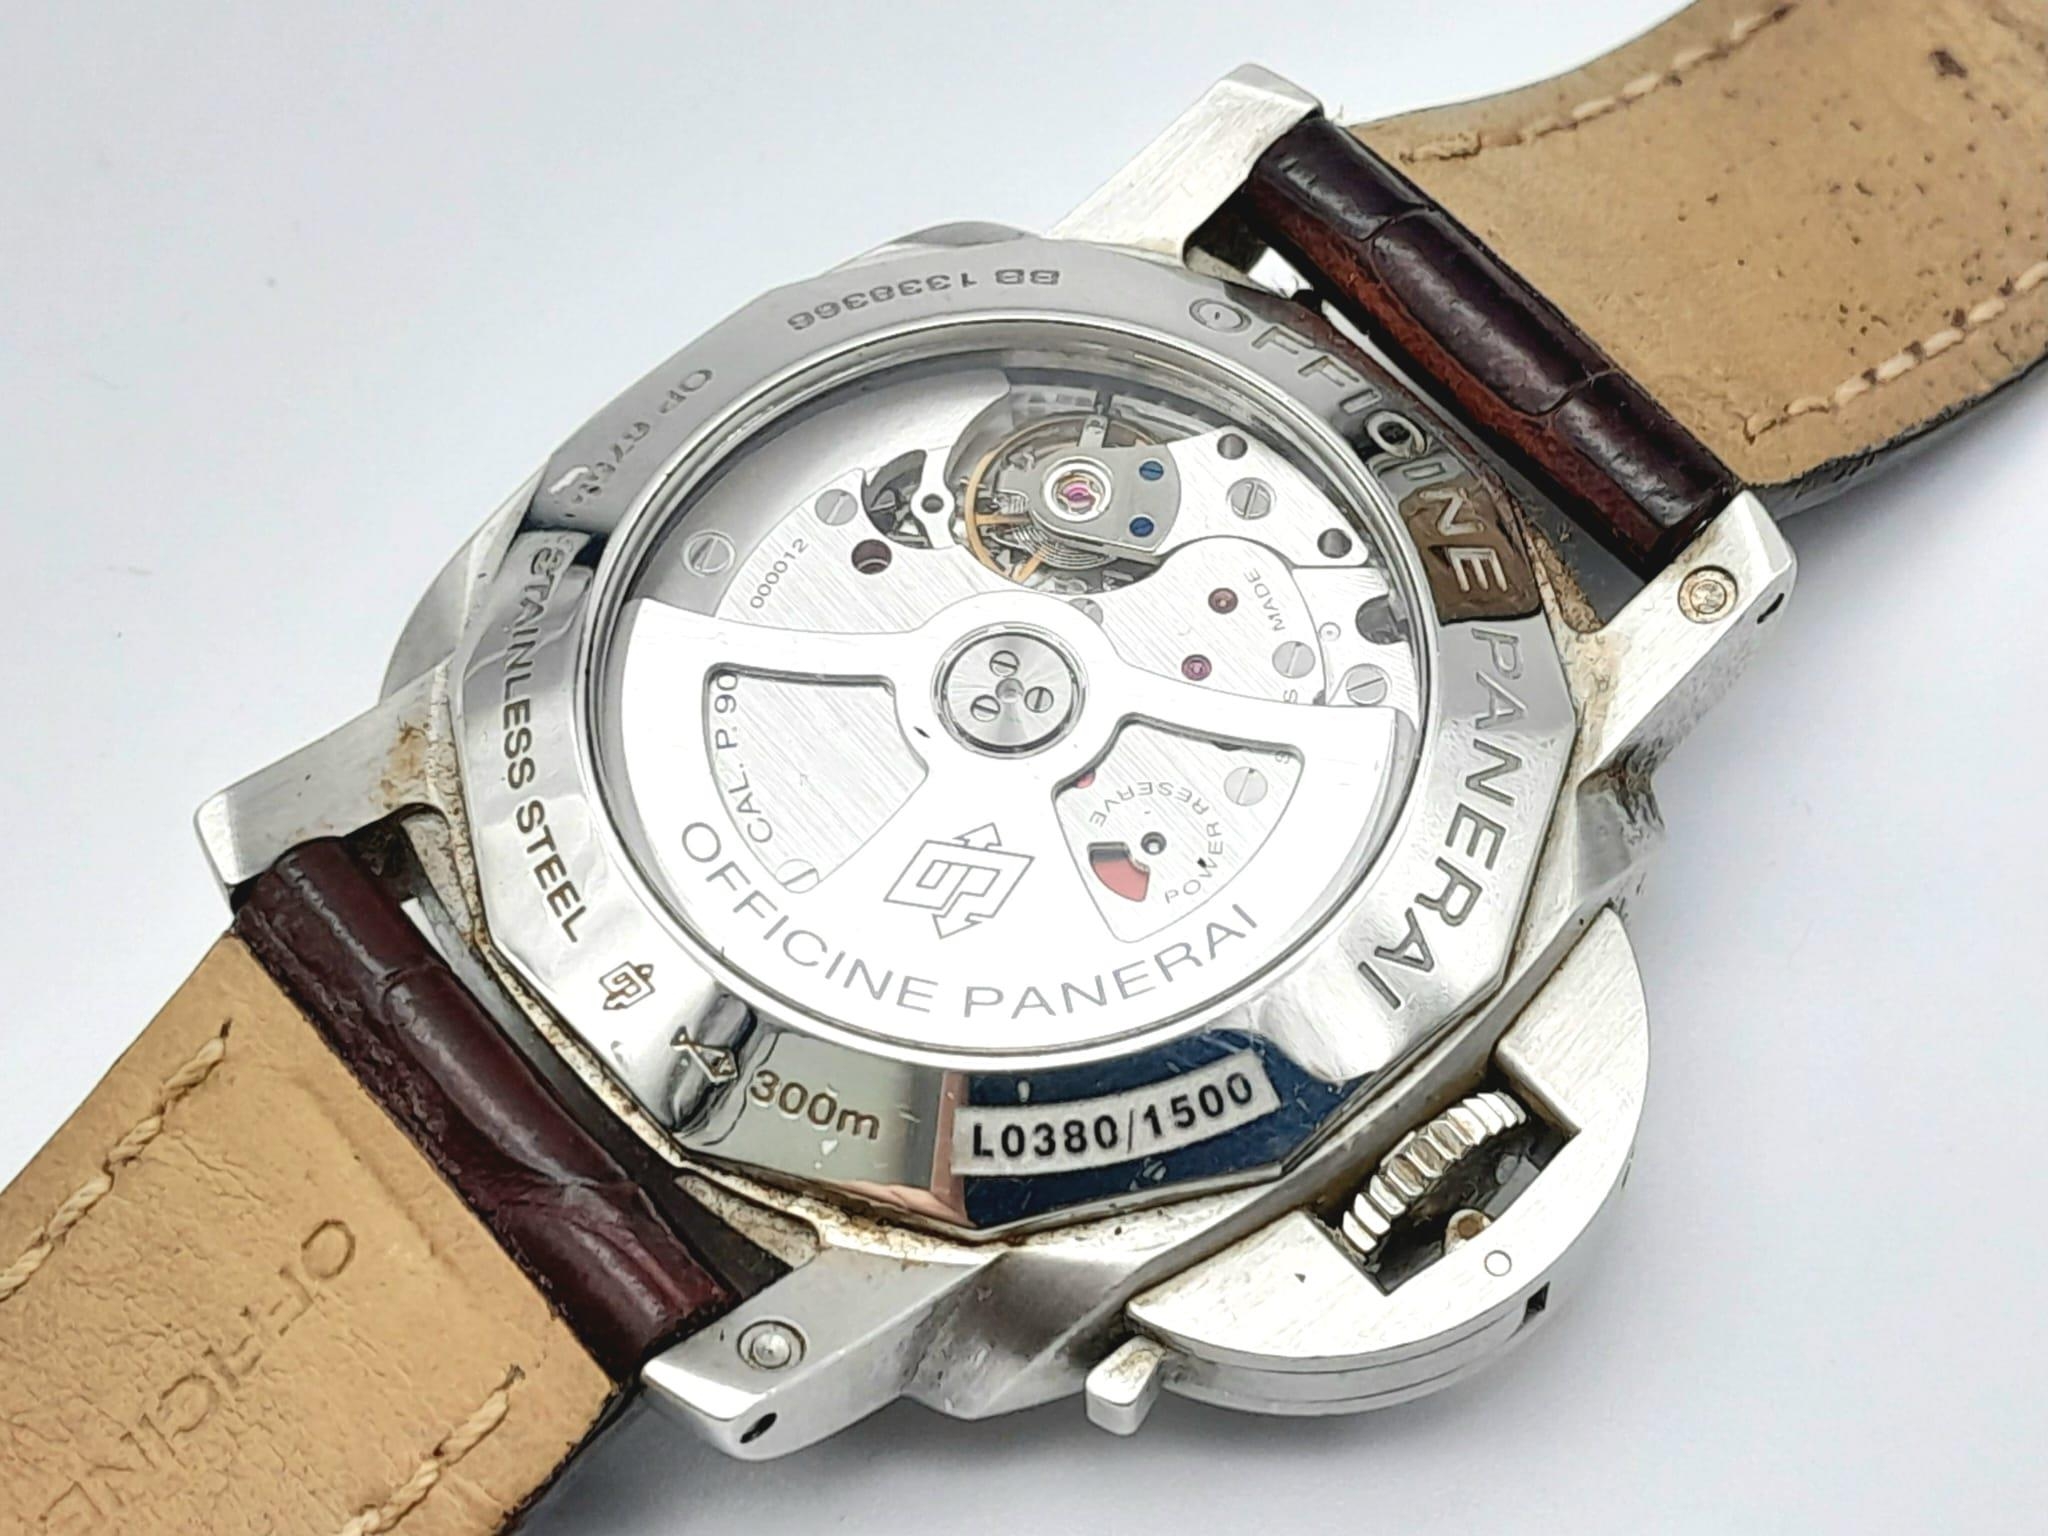 A "PANERAI LUMINOR GMT" WITH SKELETON BACK IN STAINLESS STEEL, A VERY SOUGHT AFTER PRESTIGE WATCH! - Image 10 of 11